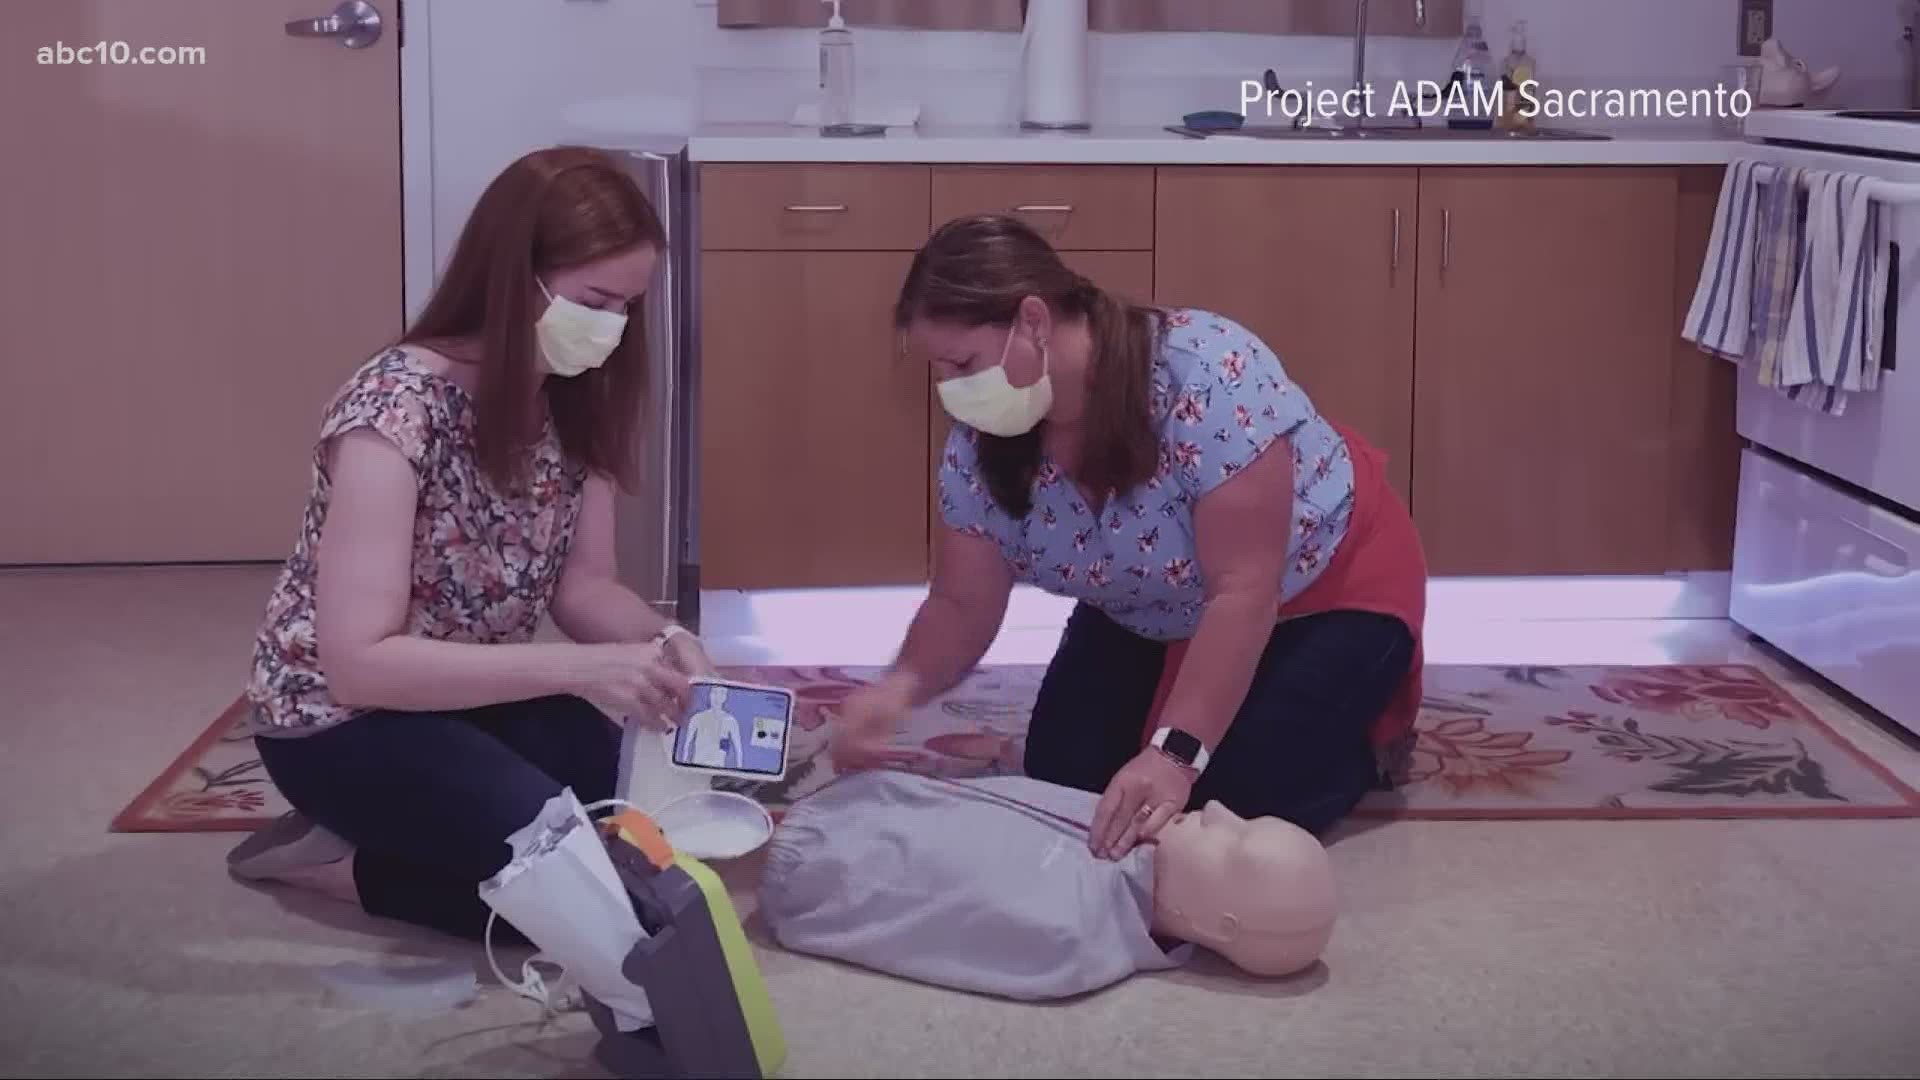 On the last day of CPR and AED Awareness Week, Project ADAM breaks down the importance of learning CPR and how to use an AED.